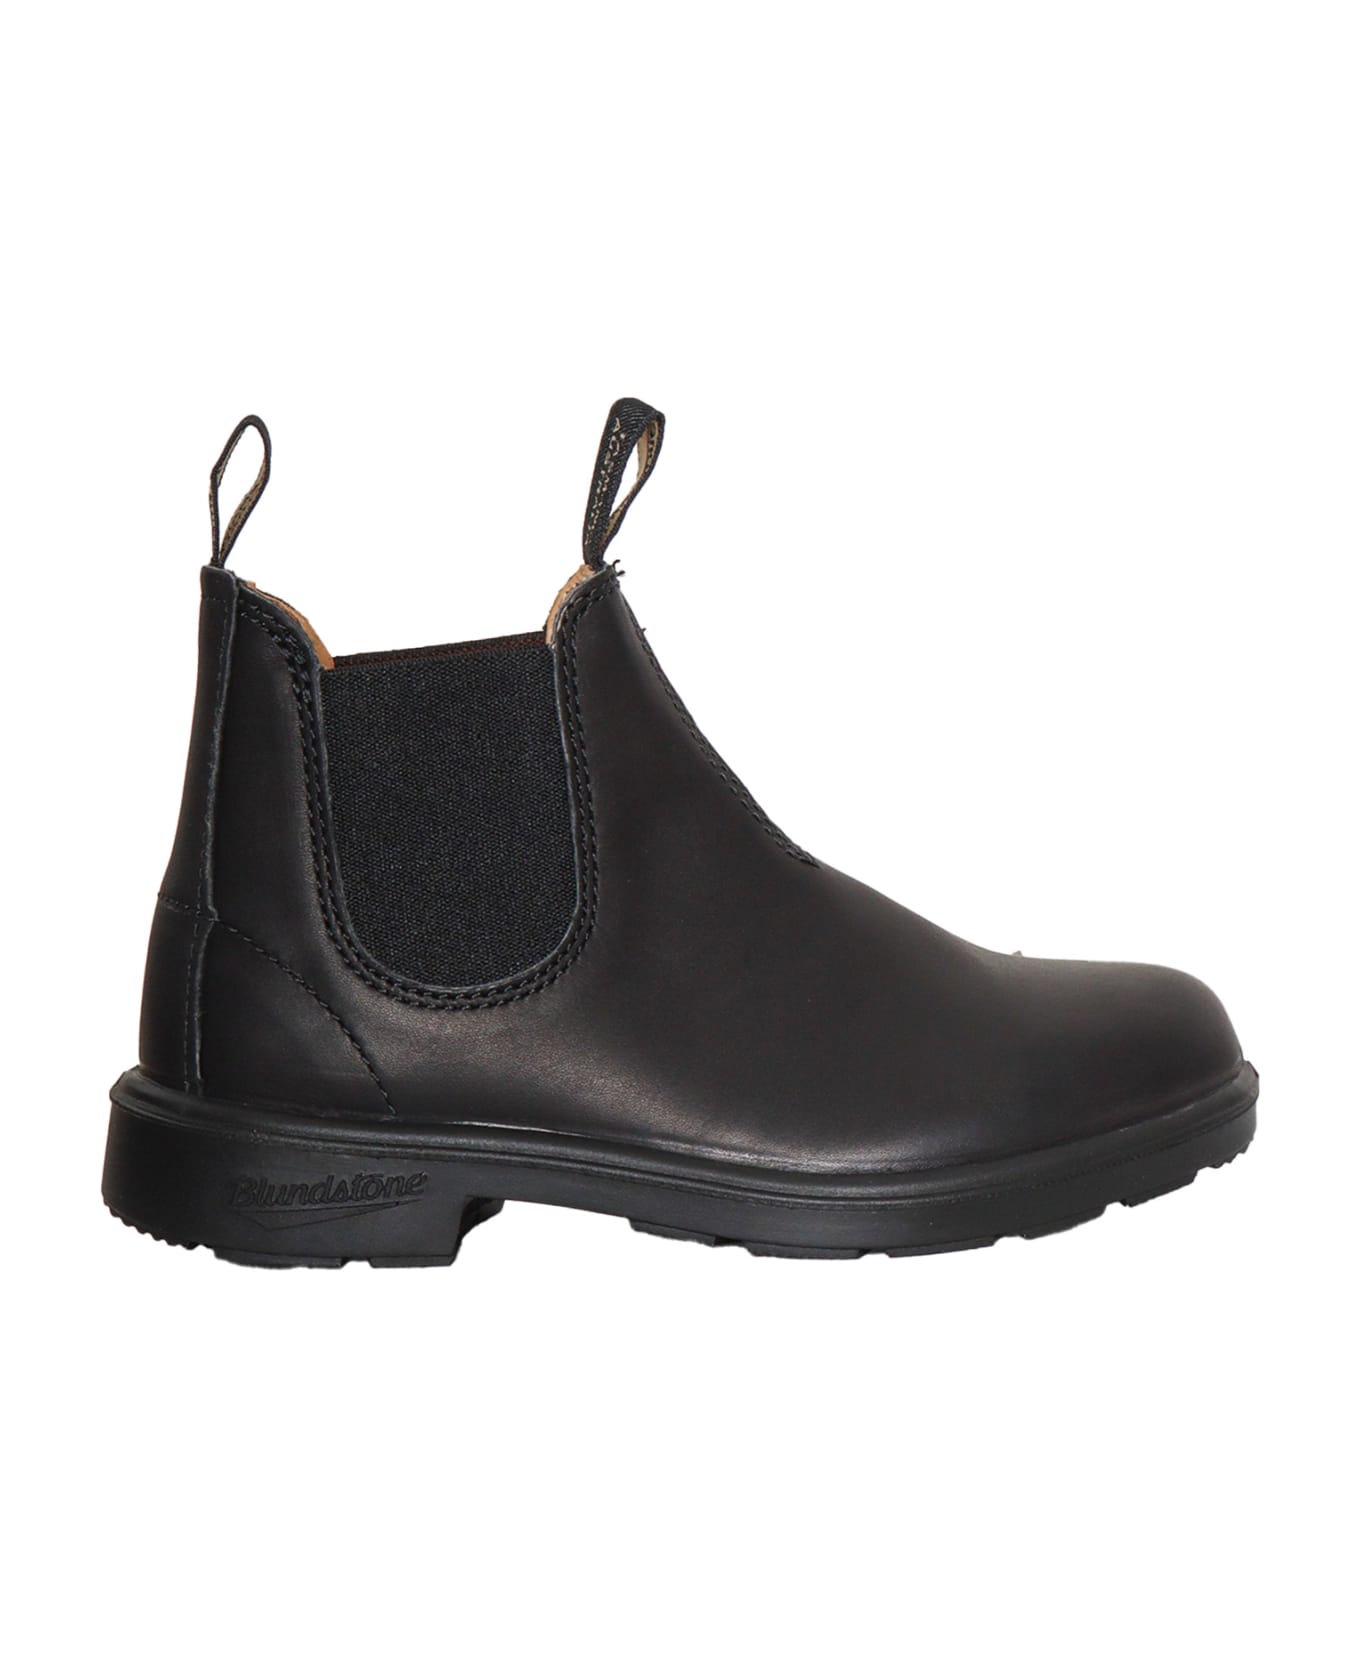 Blundstone Ankle Boots 581 - BLACK シューズ